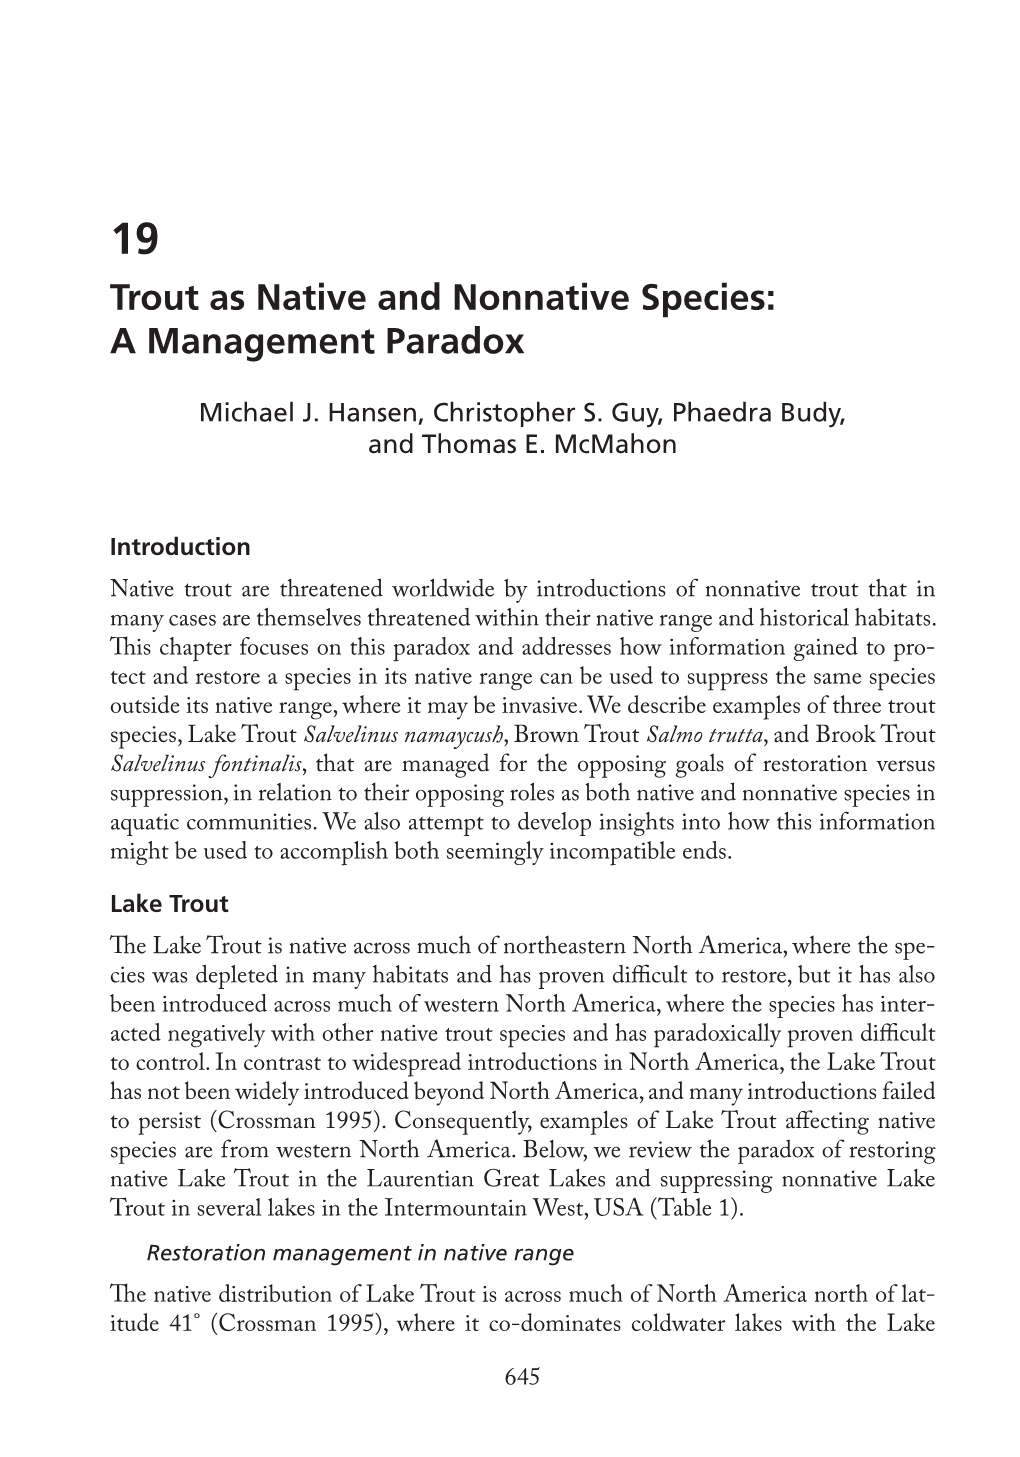 Trout As Native and Nonnative Species: a Management Paradox